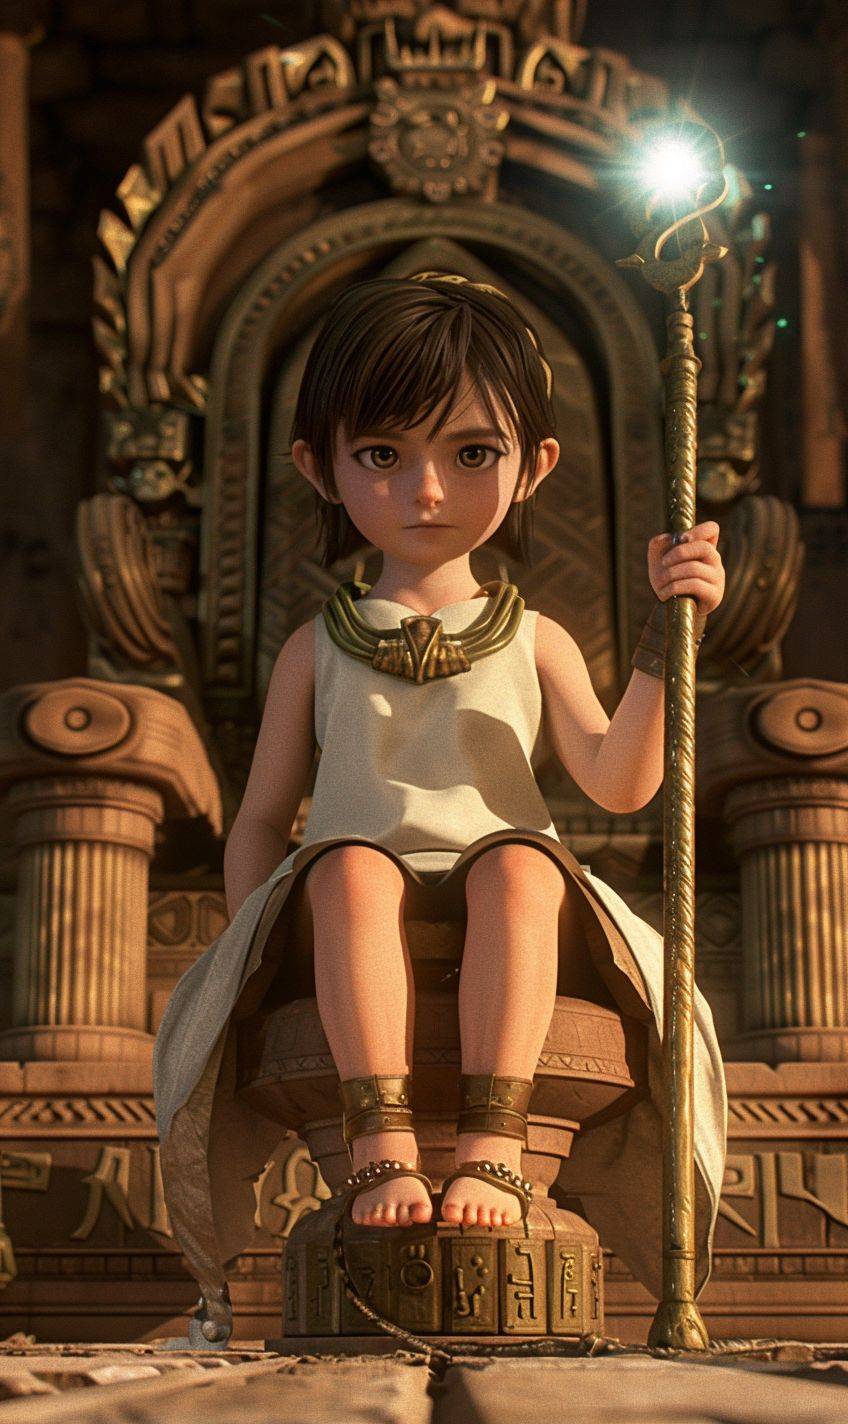 A three-year-old girl with smooth brown hair, cut into a pixie cut and without ponytails, sitting with a serious face on a high pedestal in an ancient temple, on a throne with a magical, glowing staff in her hand. The girl looks funny and cute in a Pixar fairytale style.